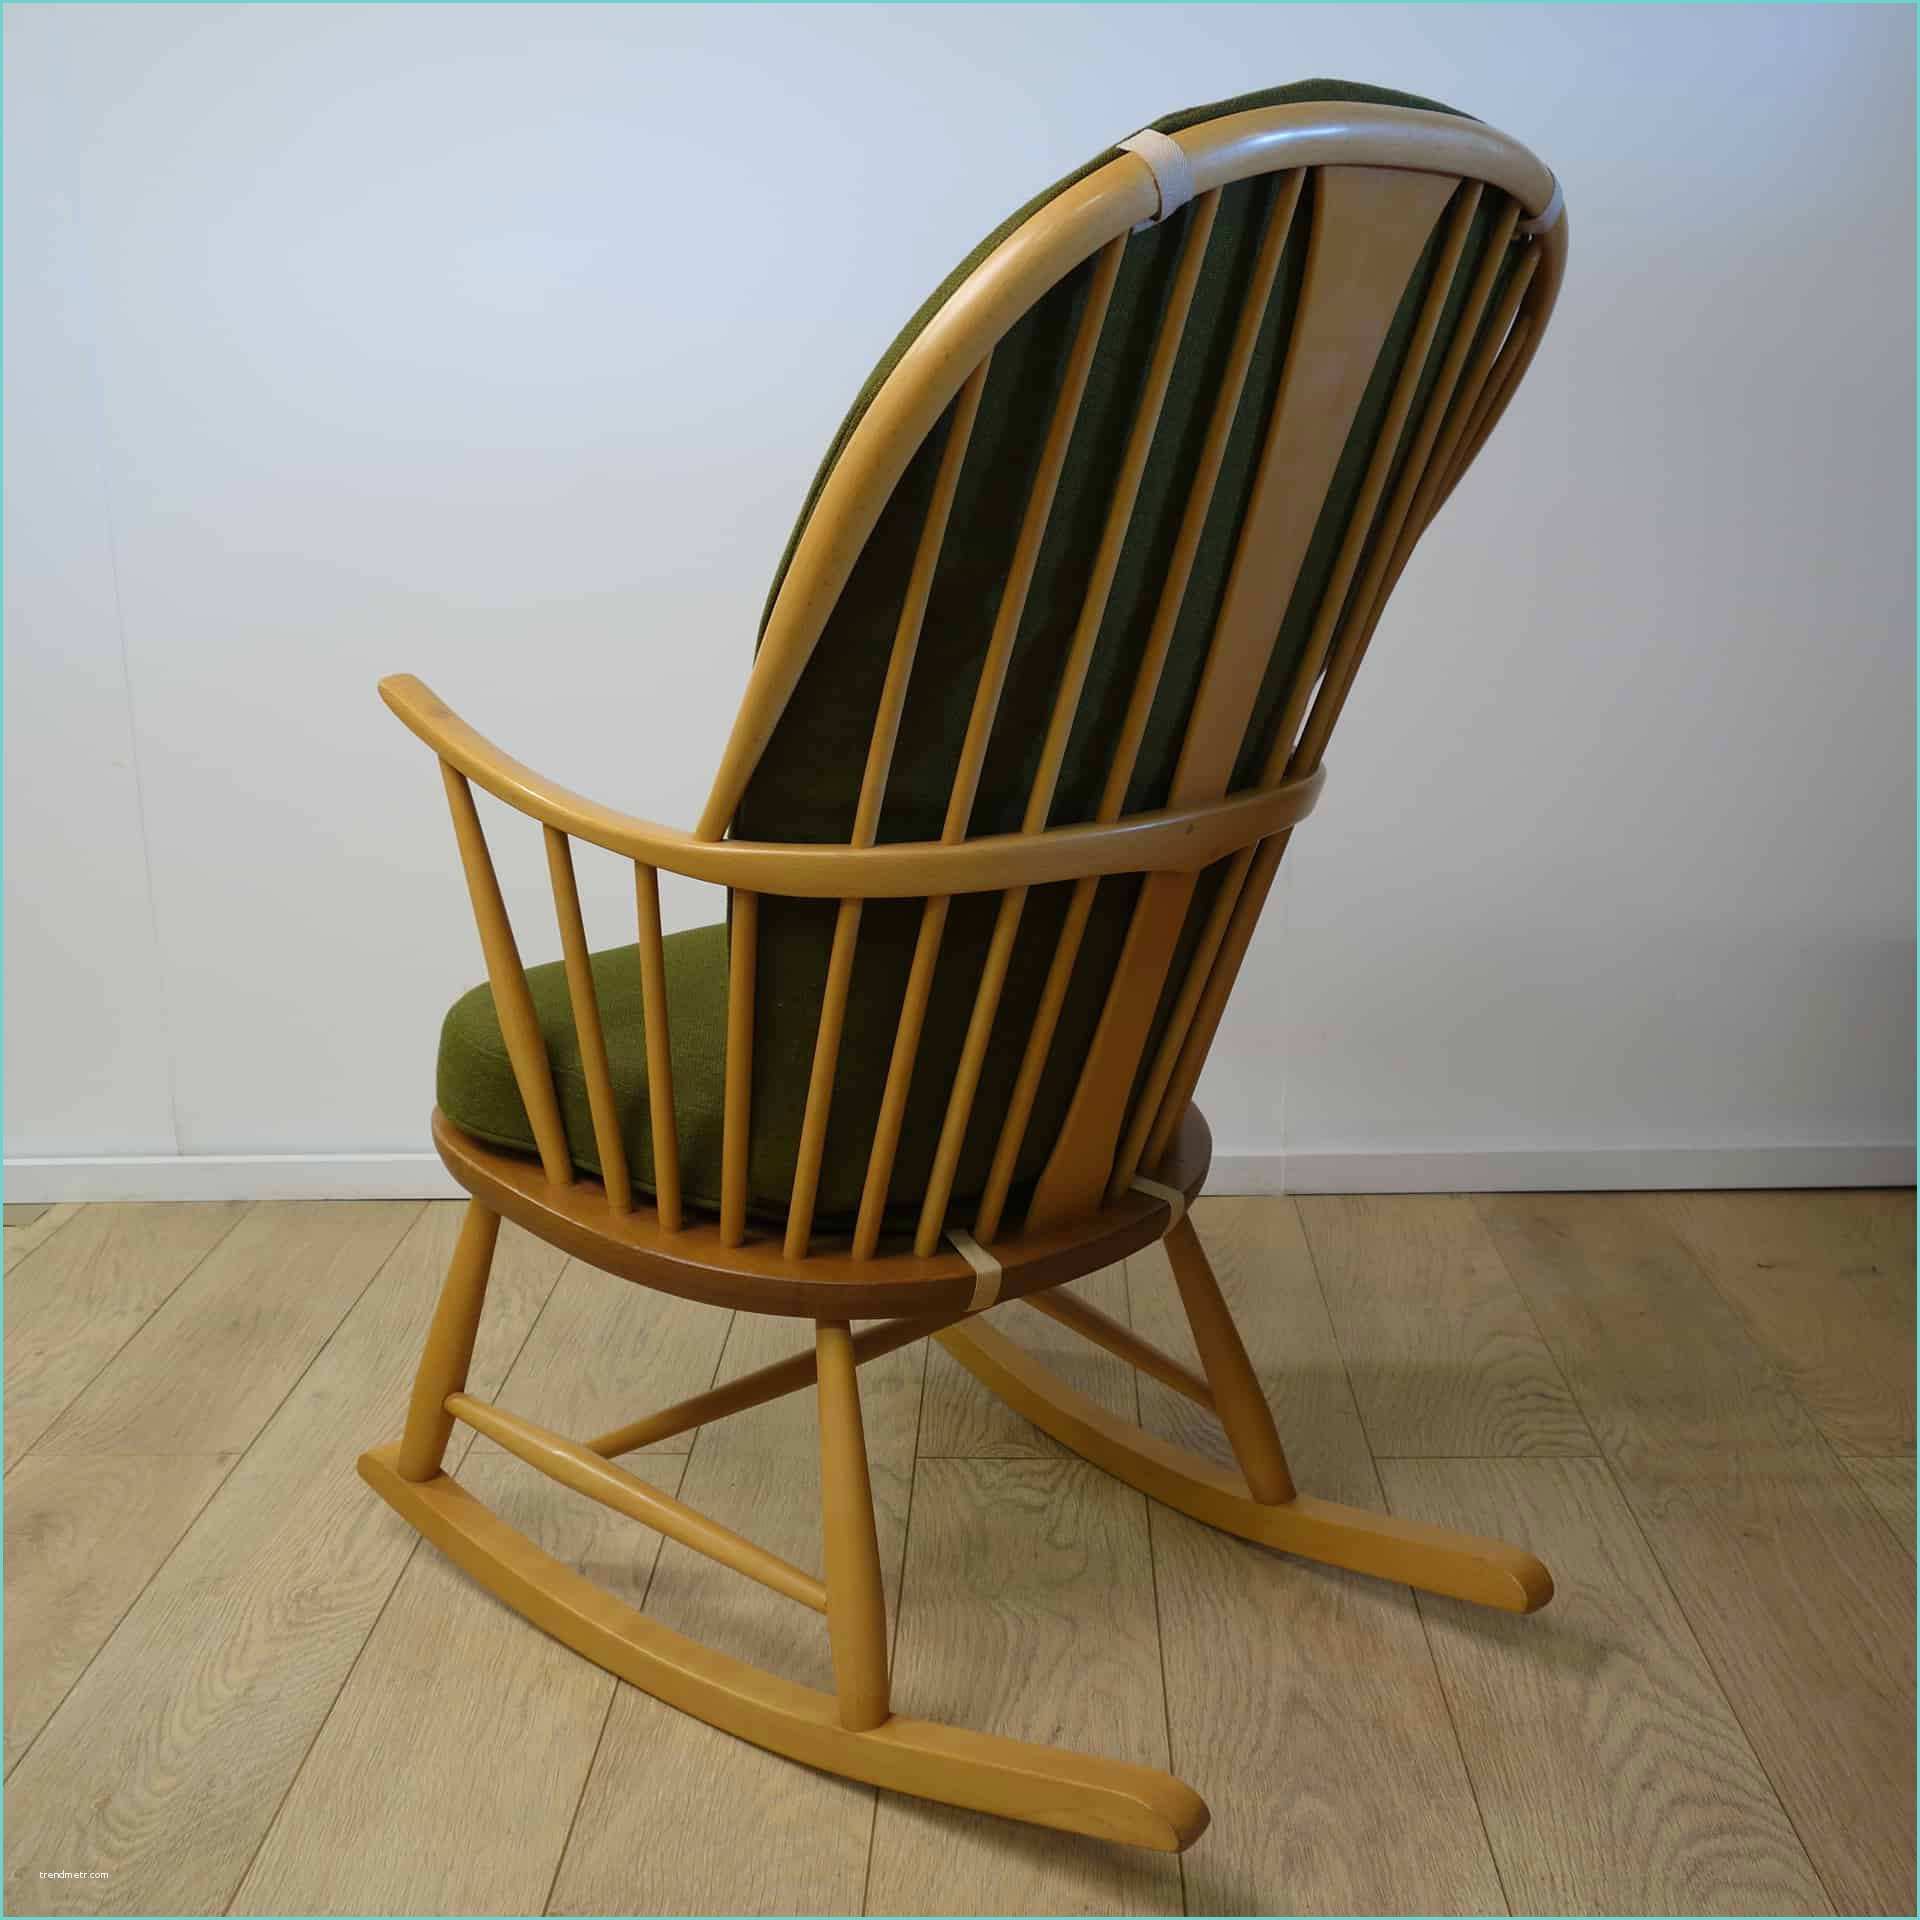 Originals Chairmakers Rocking Chair An Ercol Chairmakers Rocking Chair Mark Parrish Mid